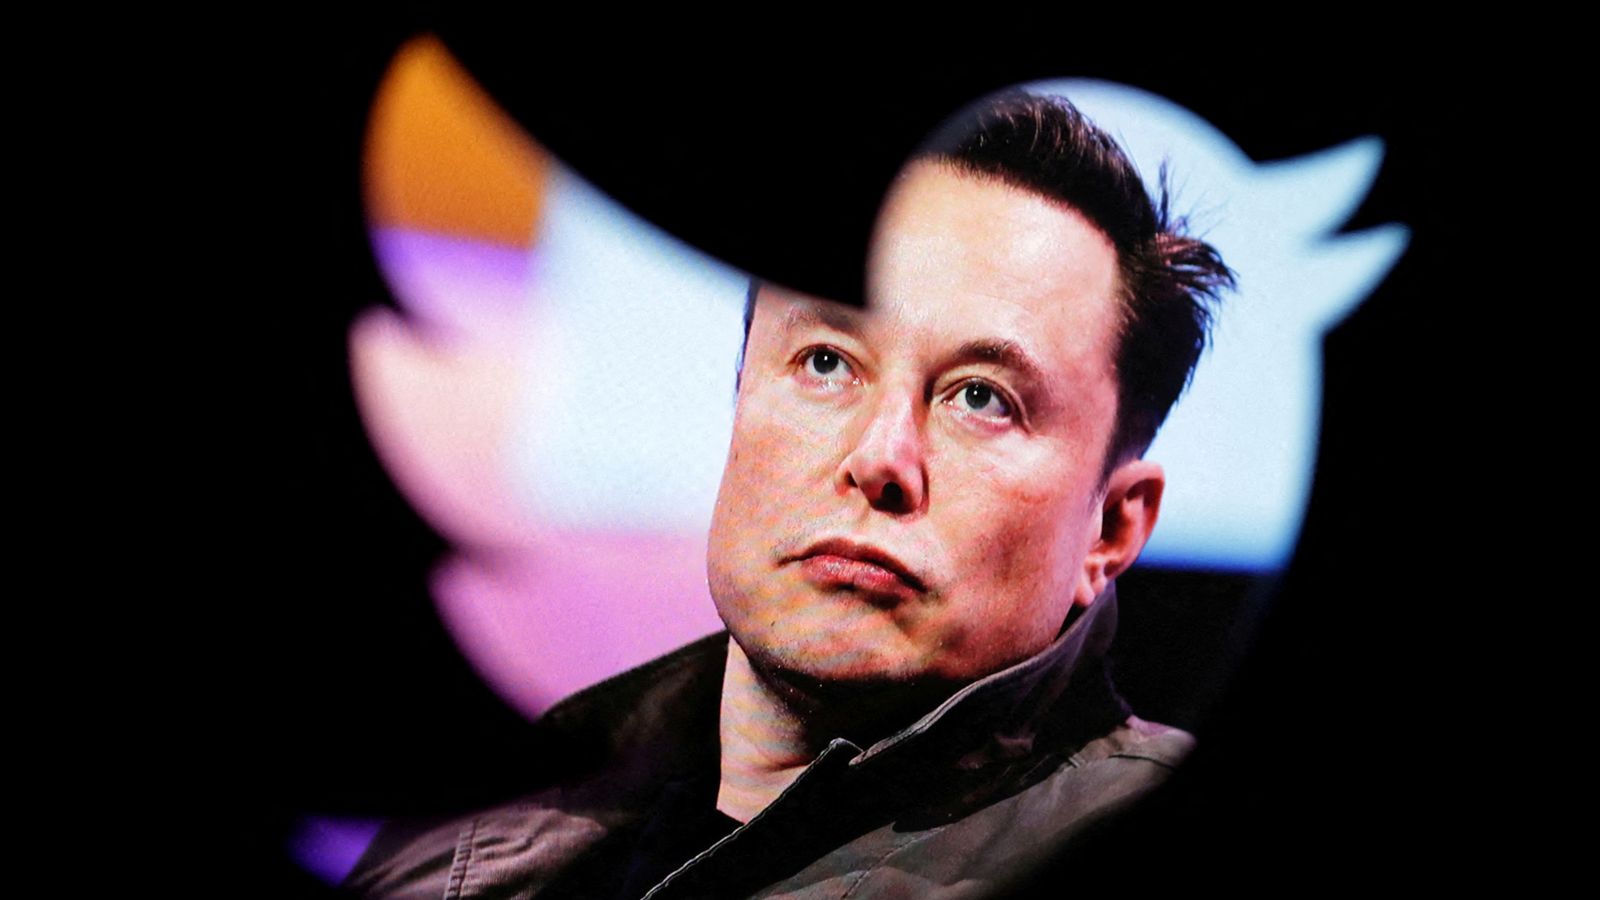 Elon Musk bans Twitter accounts that impersonate others - as comedian falls victim to new rule